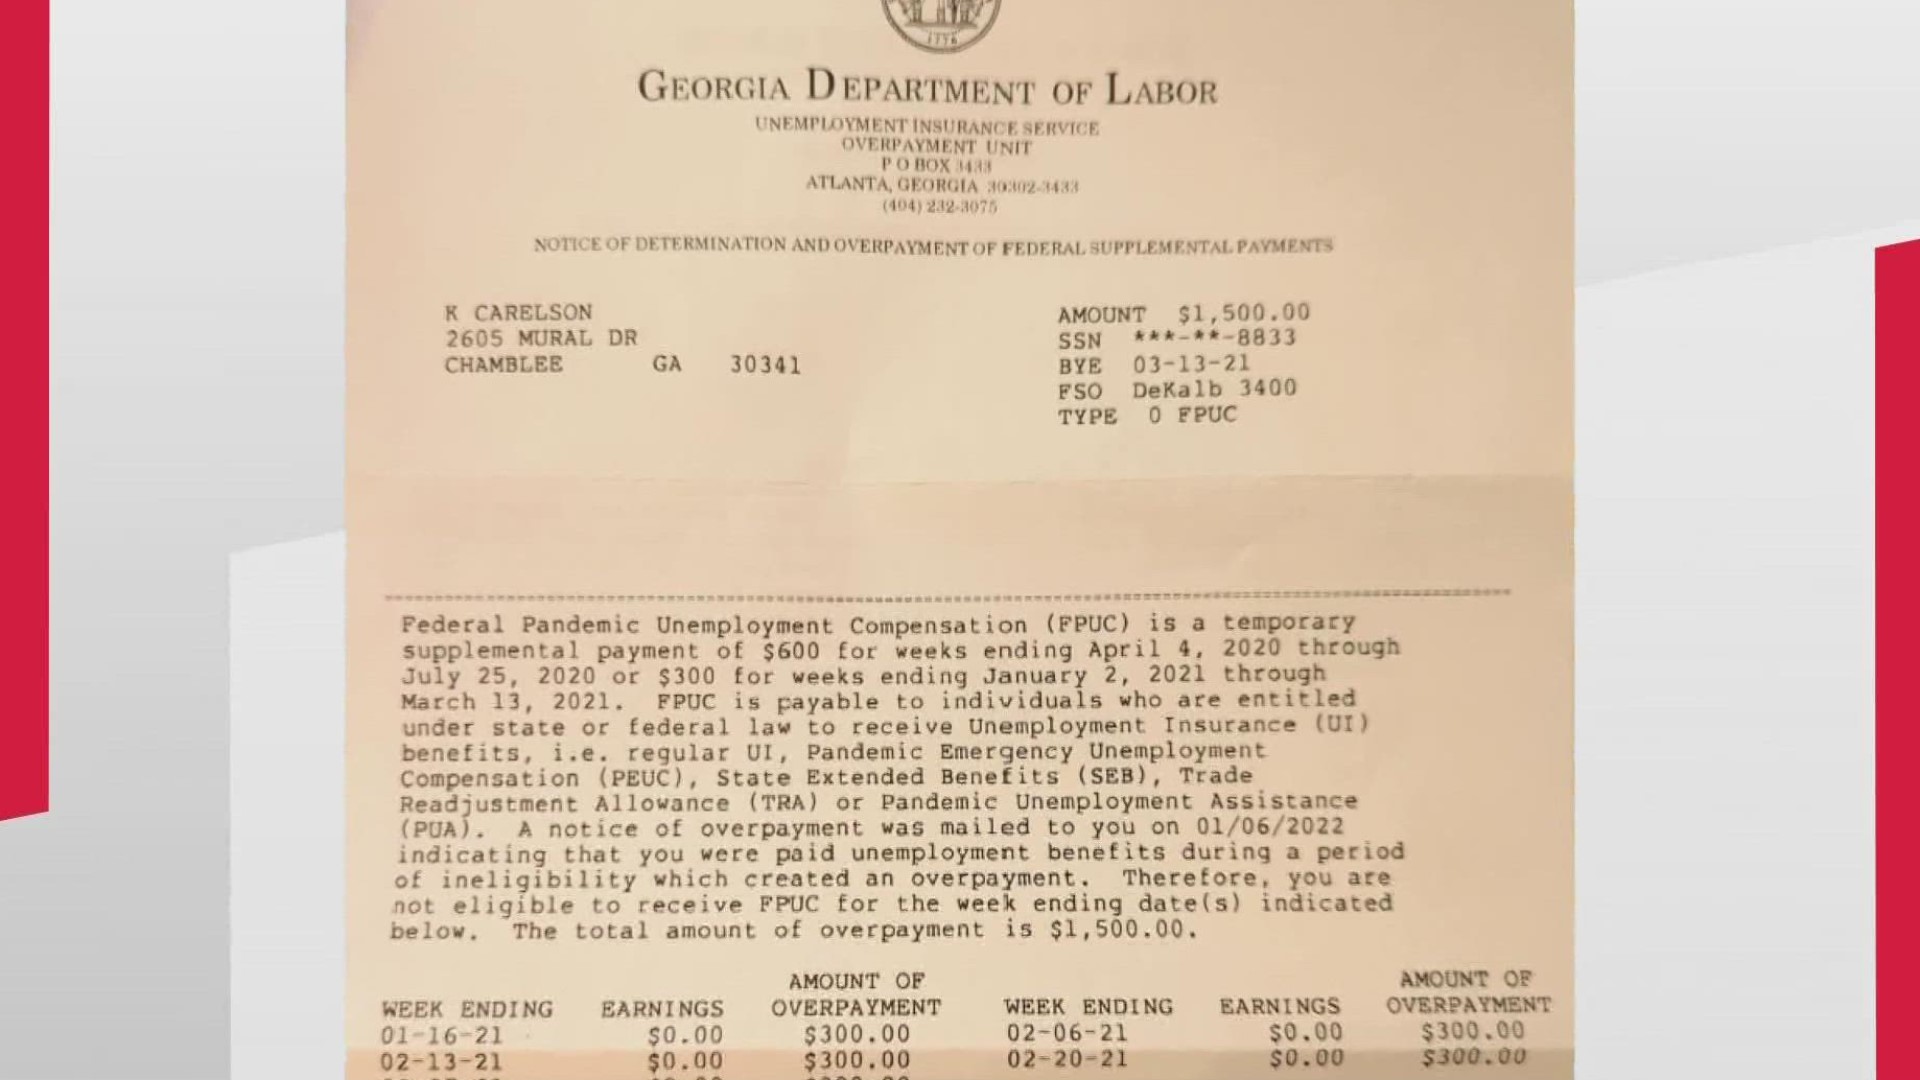 The Georgia Department of Labor blamed the employer for a mishap, resulting in overpayment of thousands in unemployment benefits.